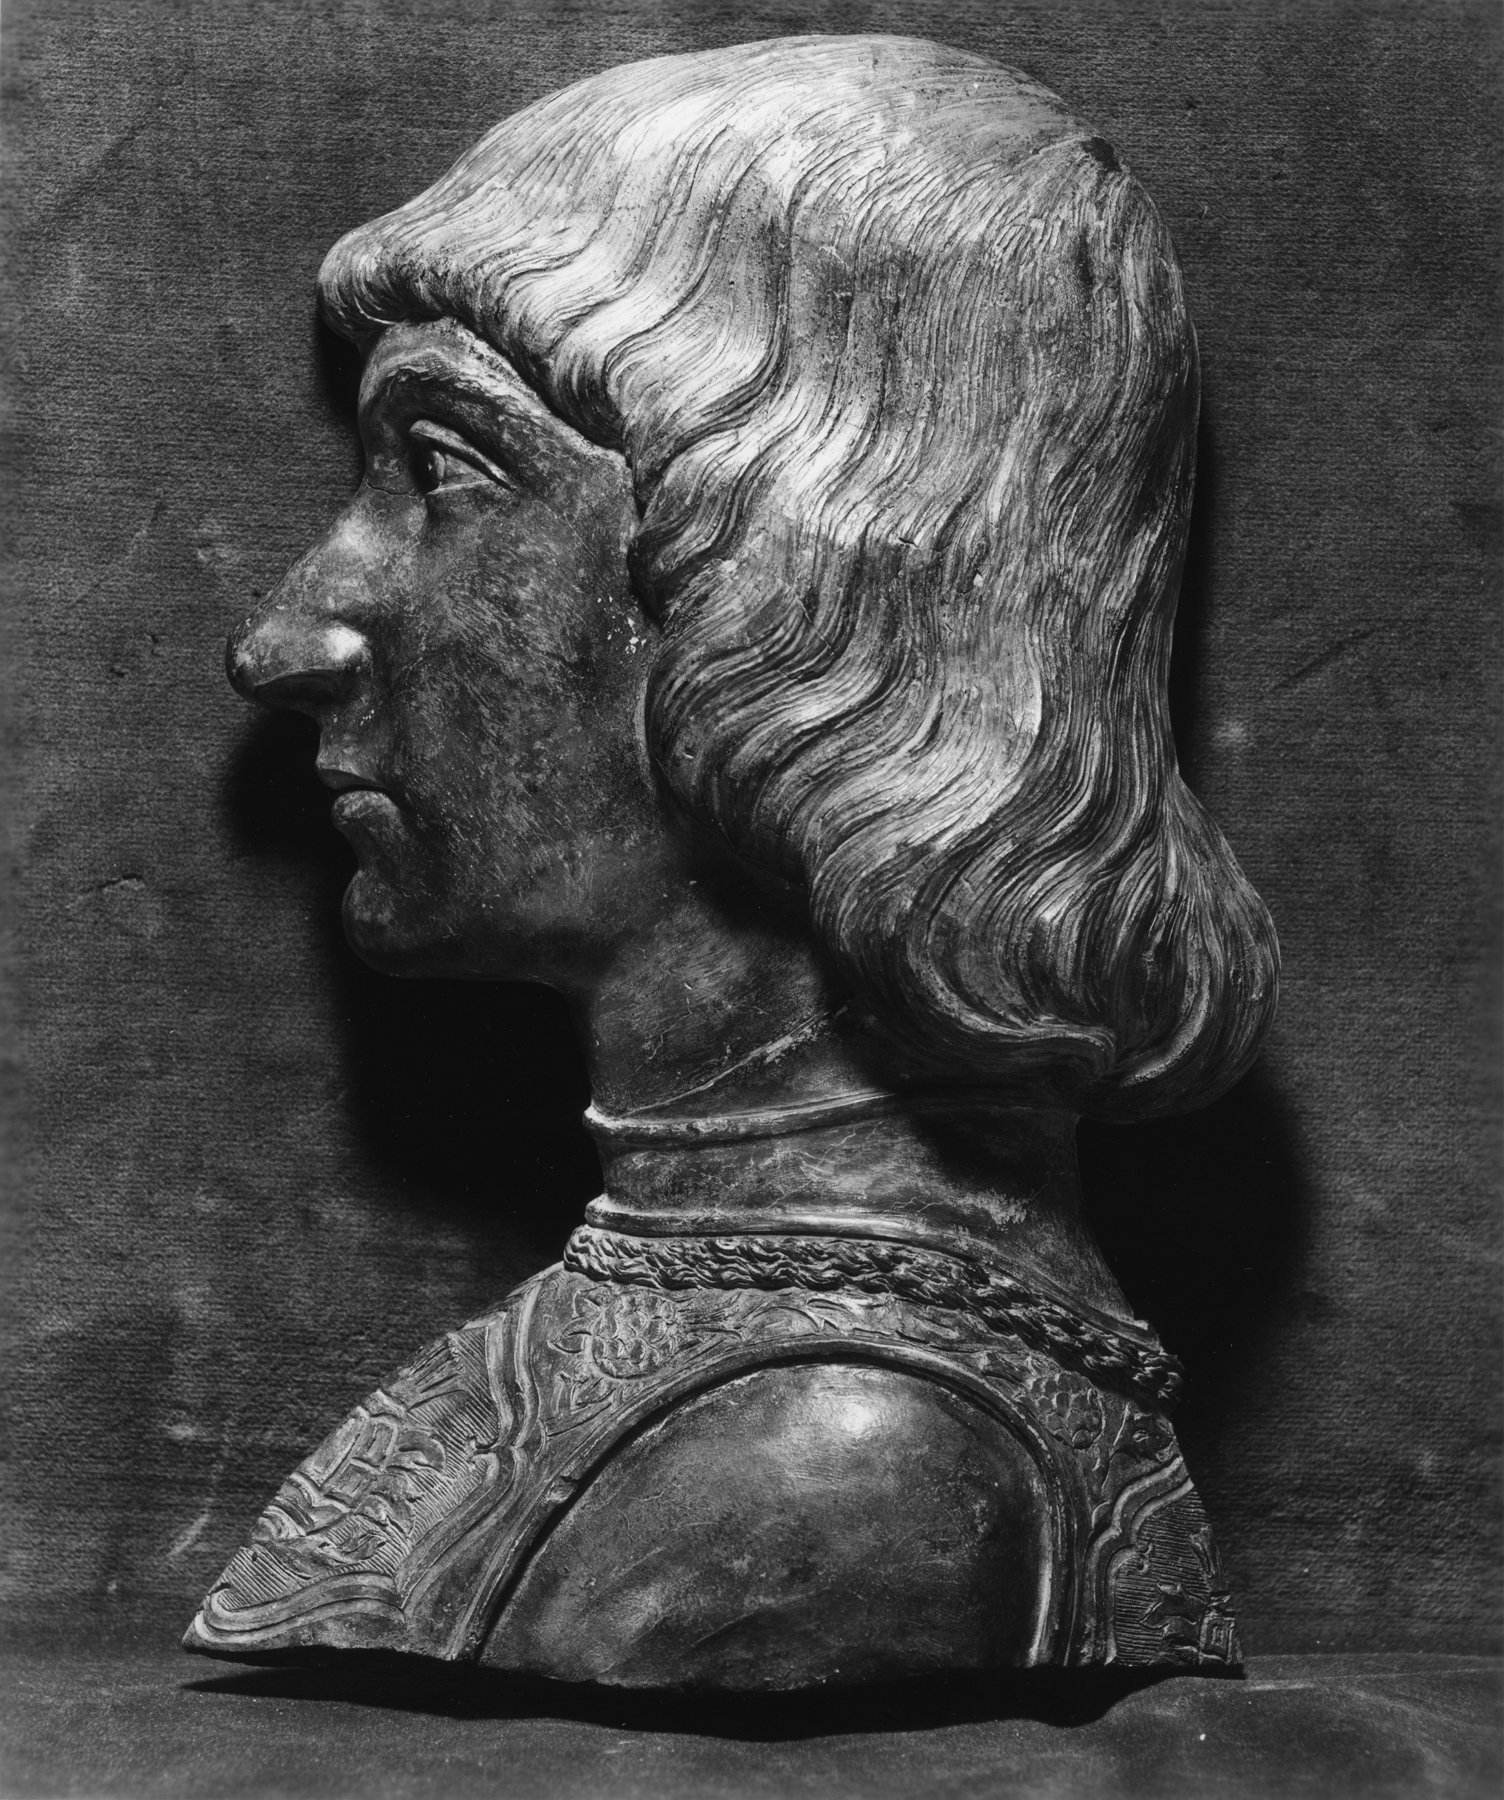 Terracotta relief of a young man, believed to be Cesare Borgia, c. 15th century. Walters Art Museum (CC0).